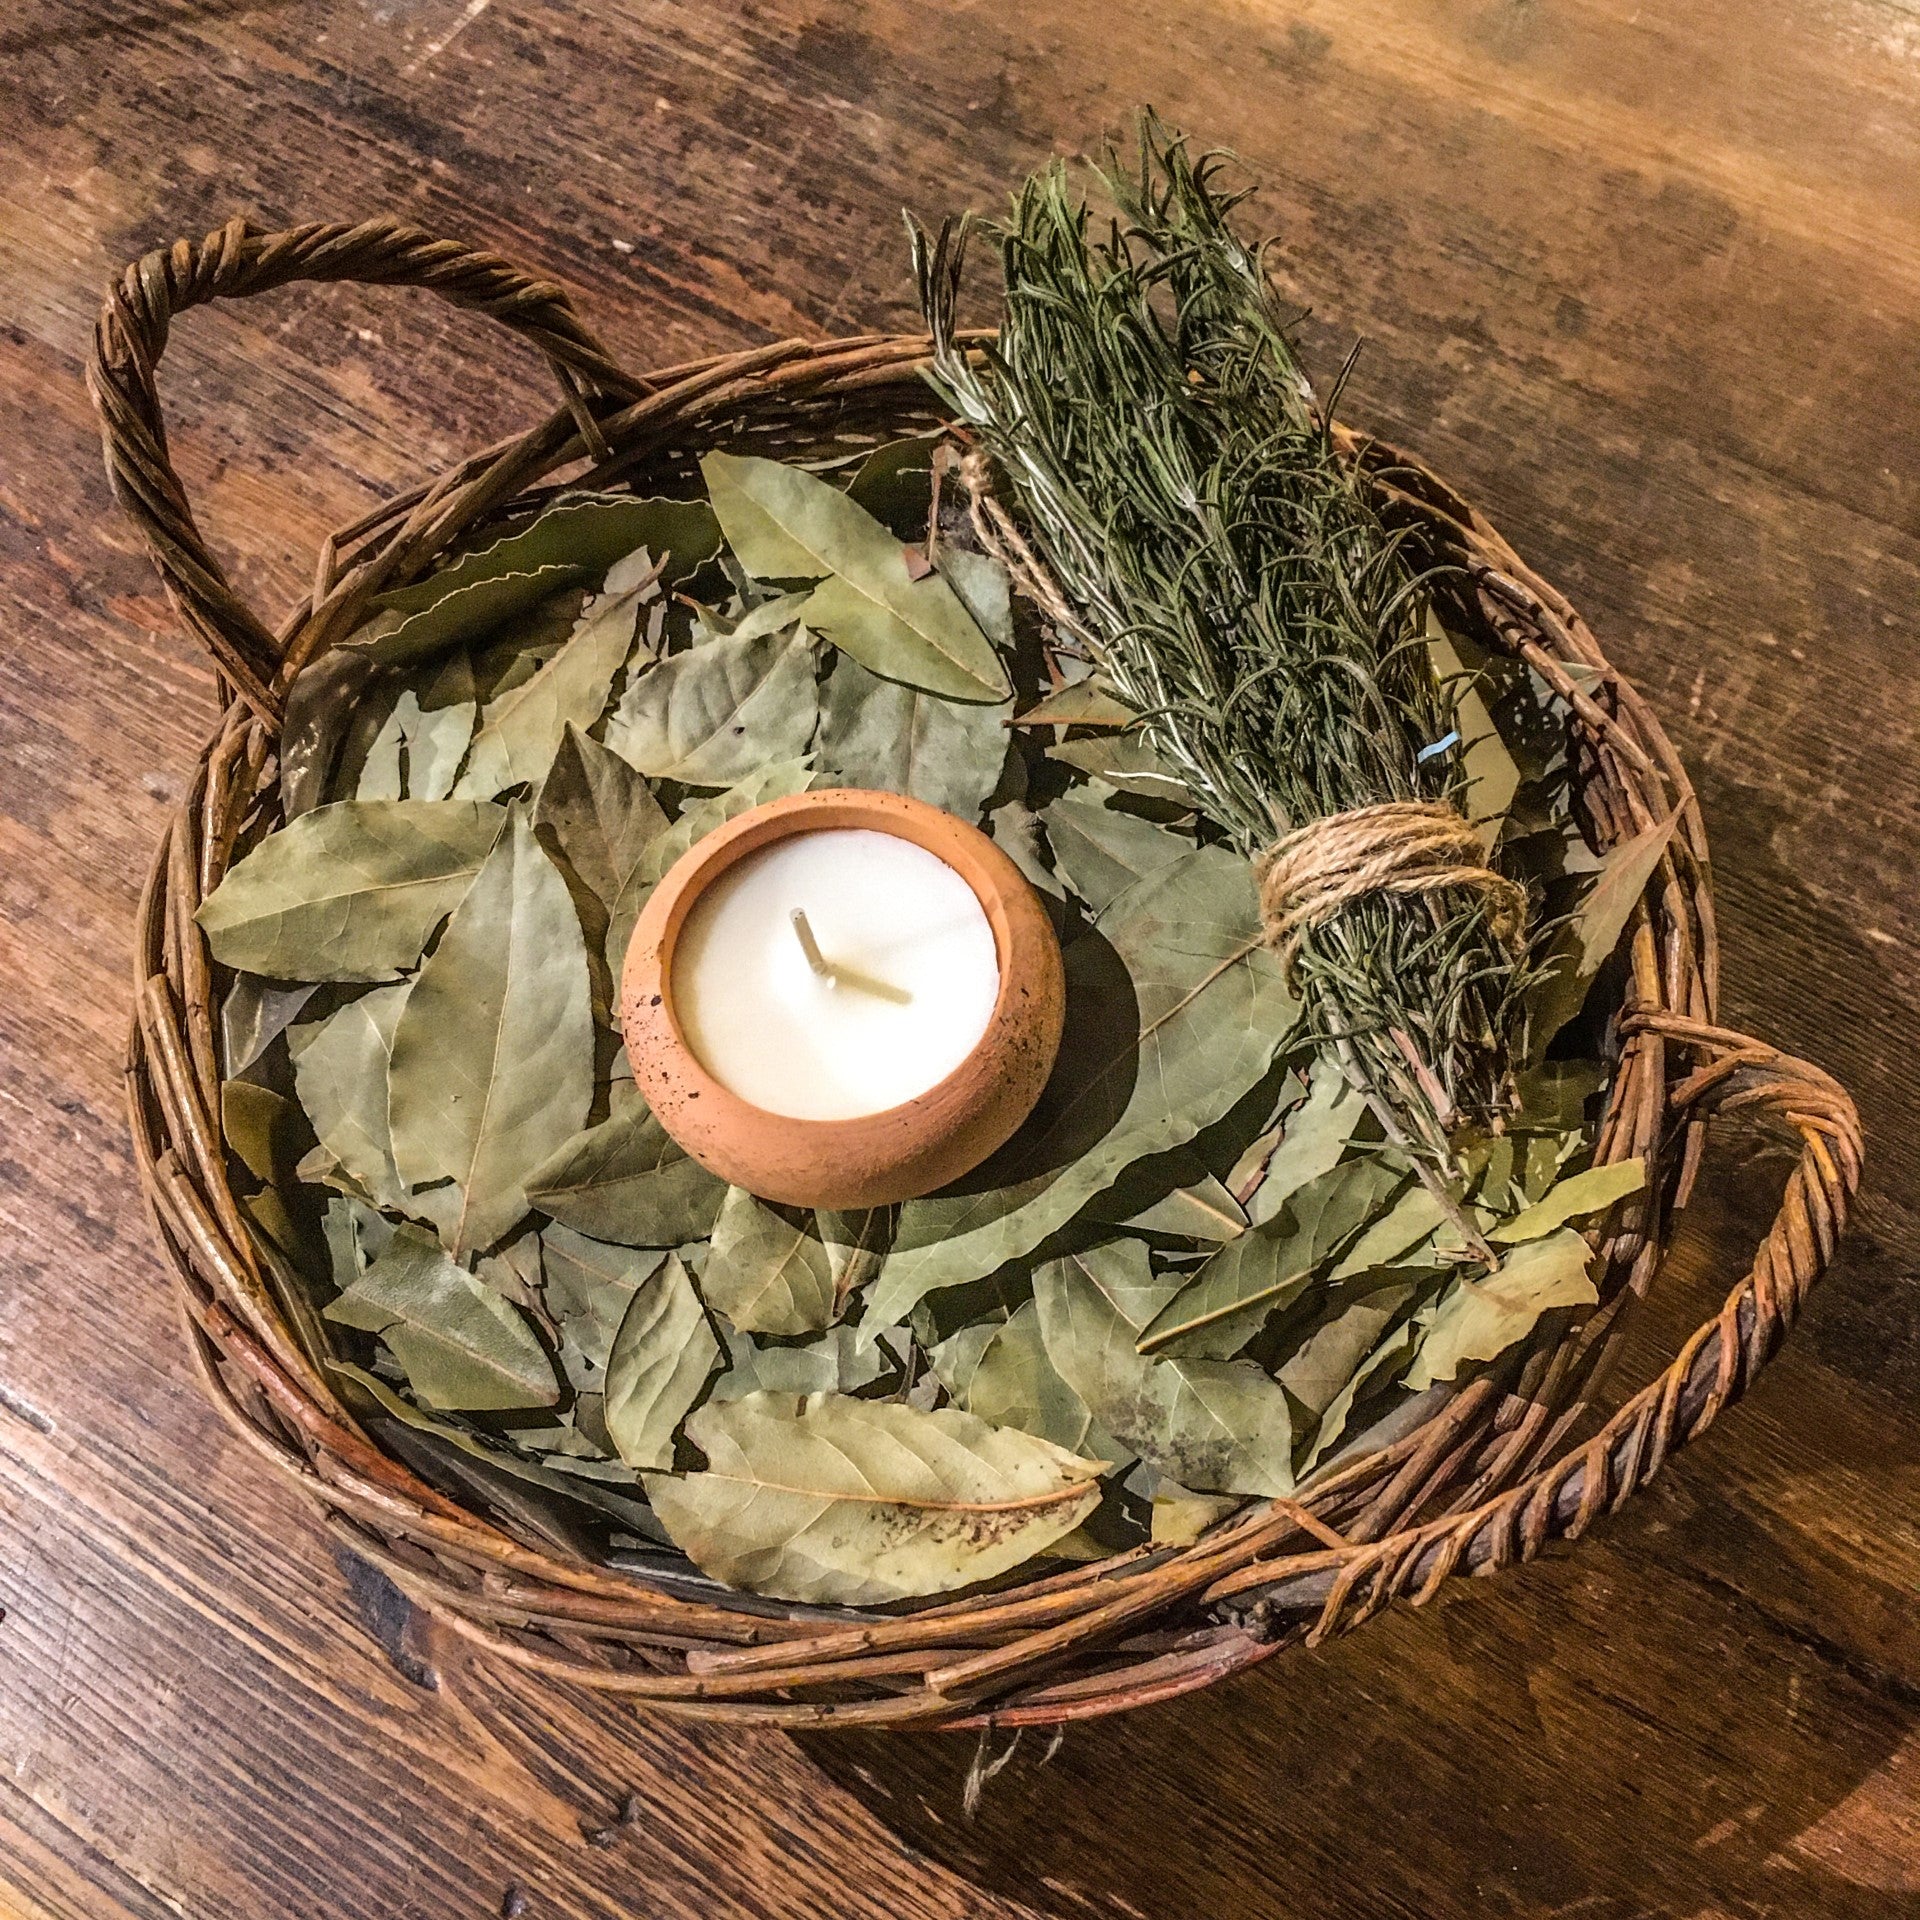 A terracotta candle placed in a basket, on top of a pile of bay leaves and a bundle of rosemary sprigs tied with brown string